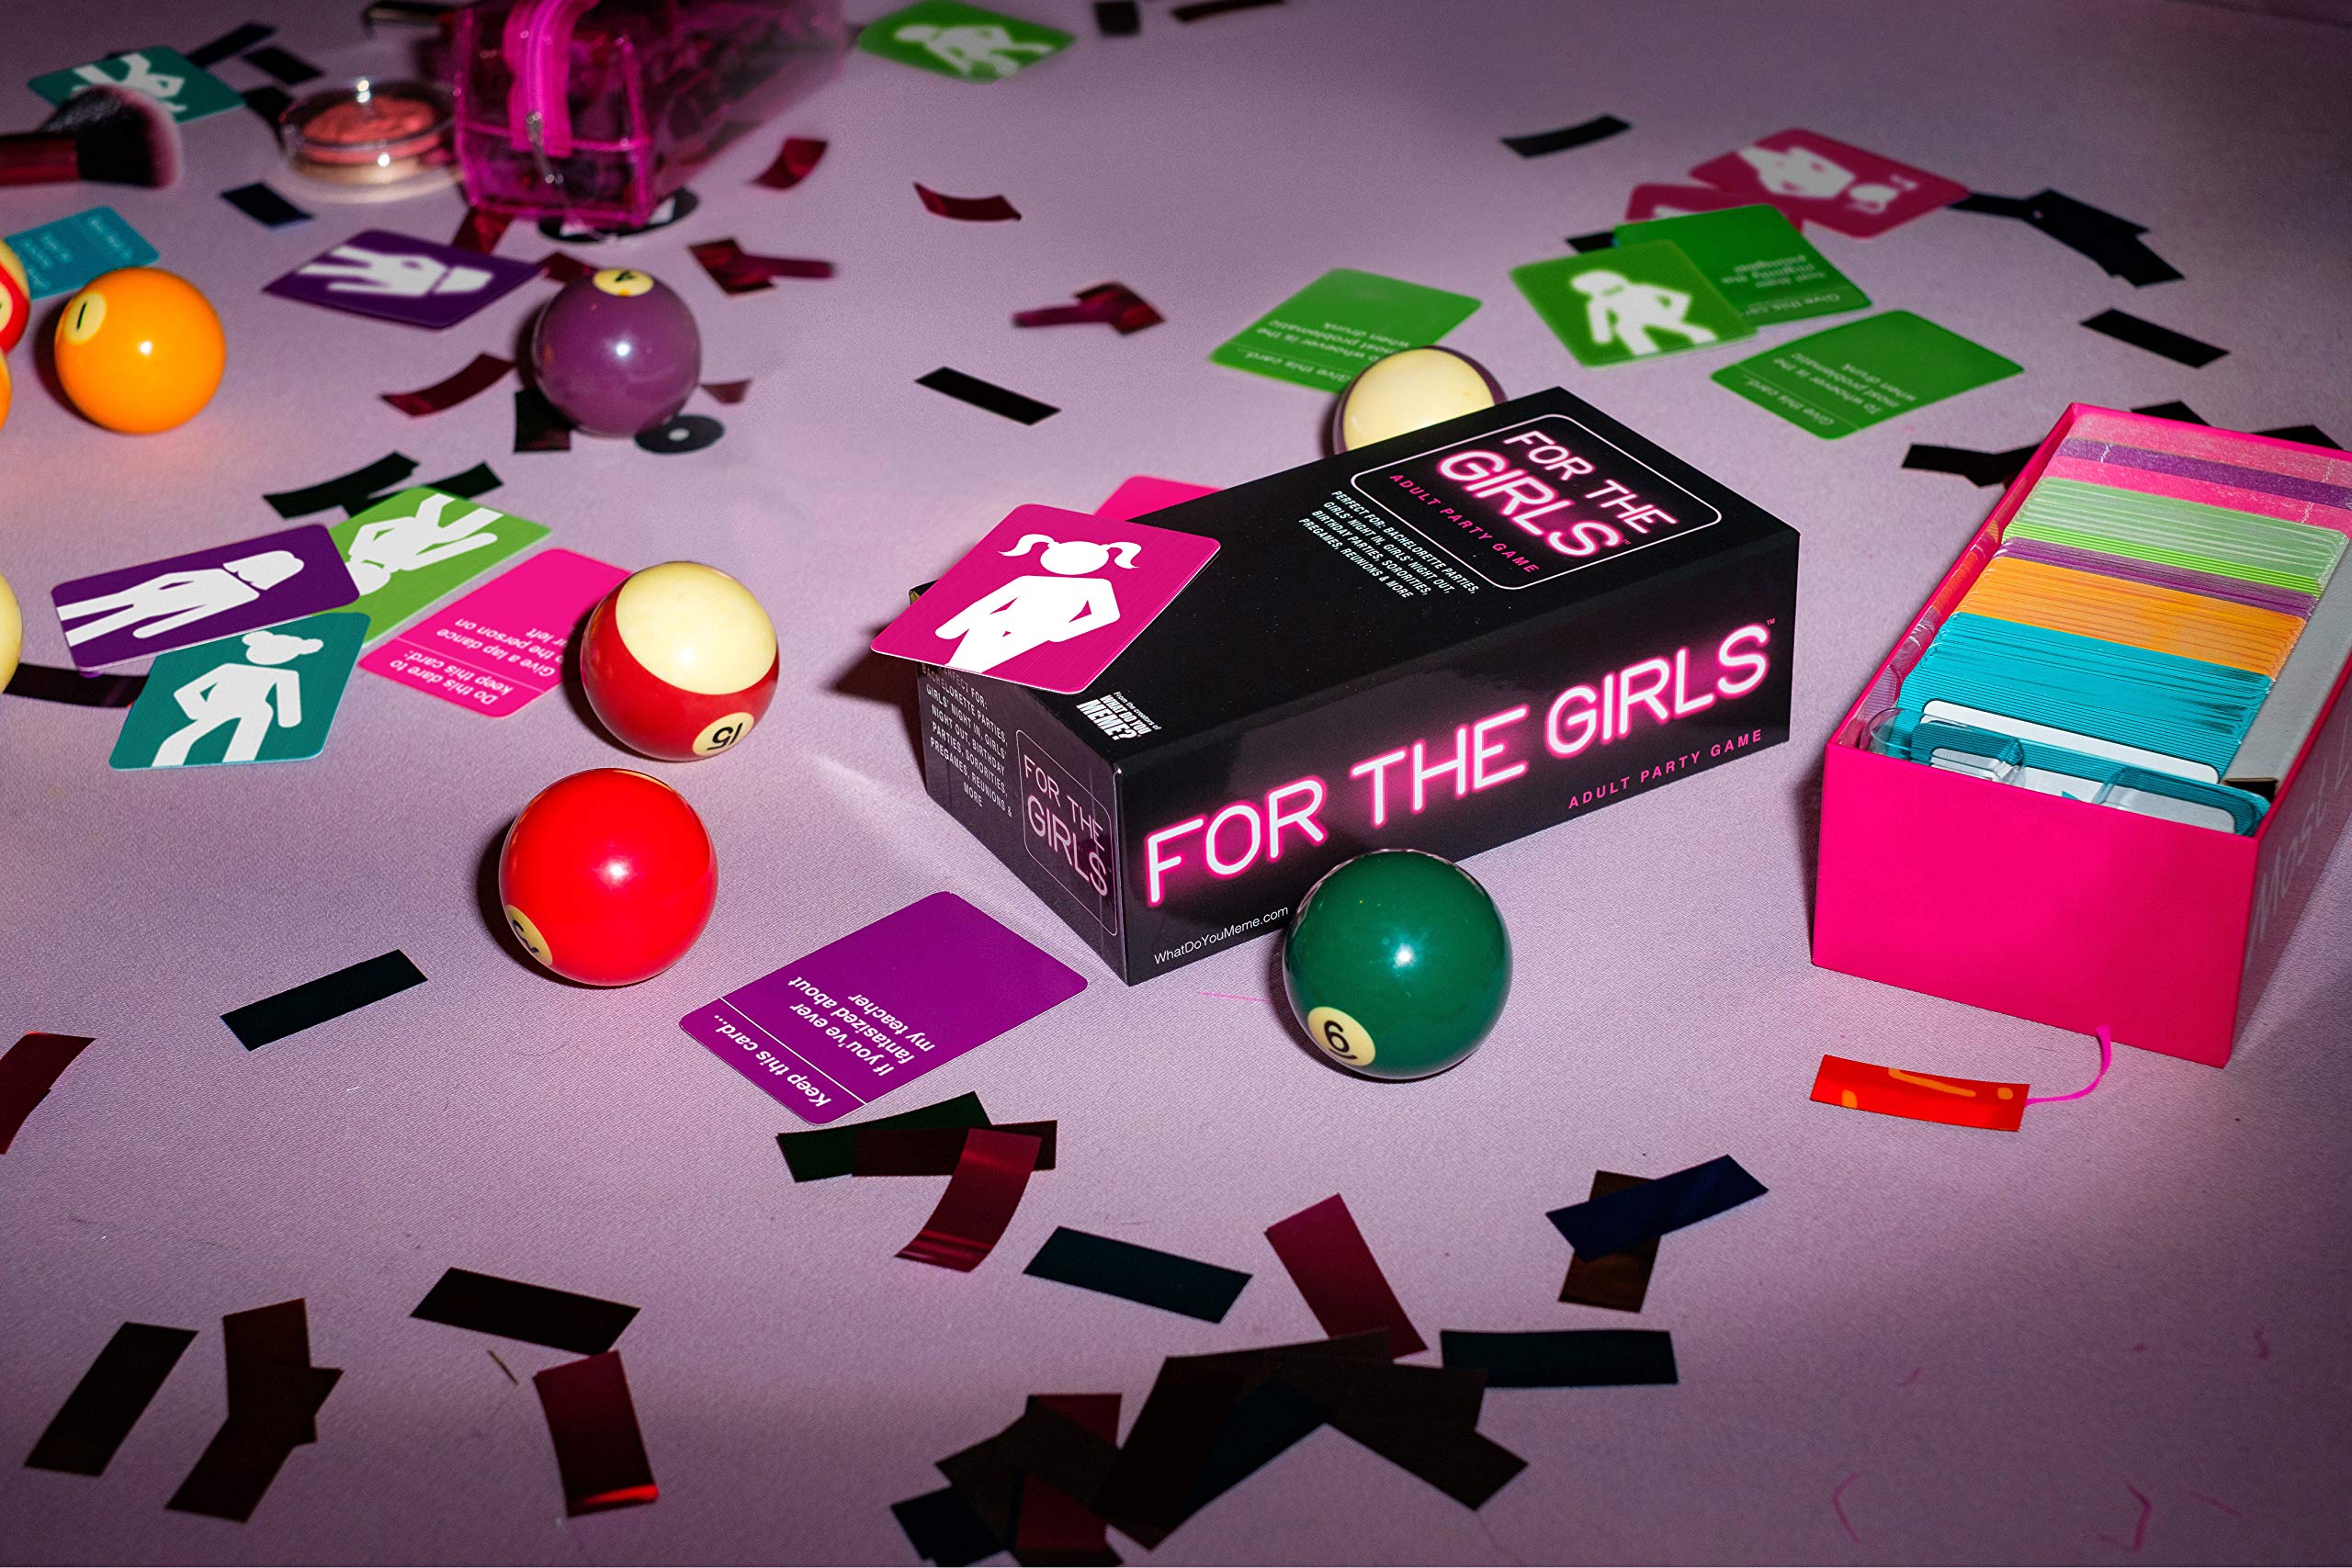 WHAT DO YOU MEME? for The Girls - The Ultimate Girls Night Party Game